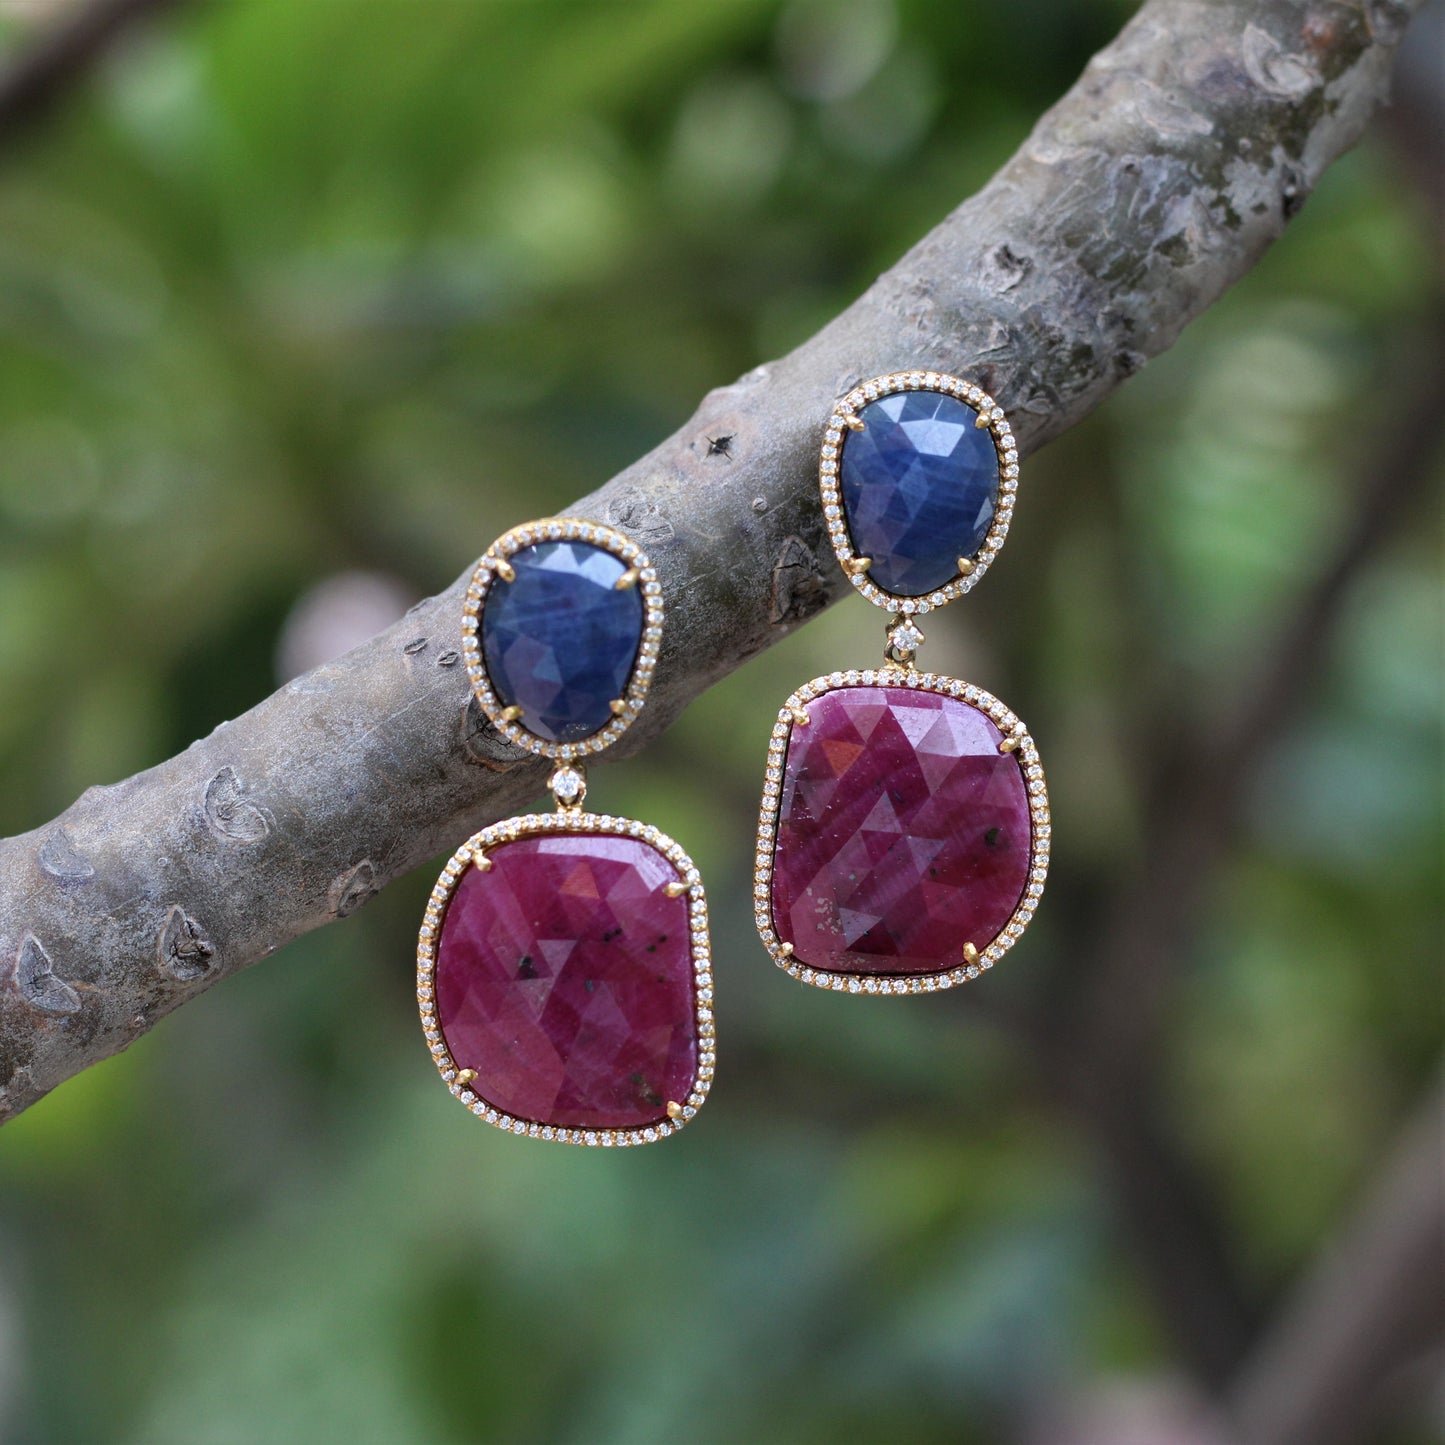 EARRING in 92.5 STERLING SILVER WITH QUBIC ZIRCONIA & SAPPHIRE stones.